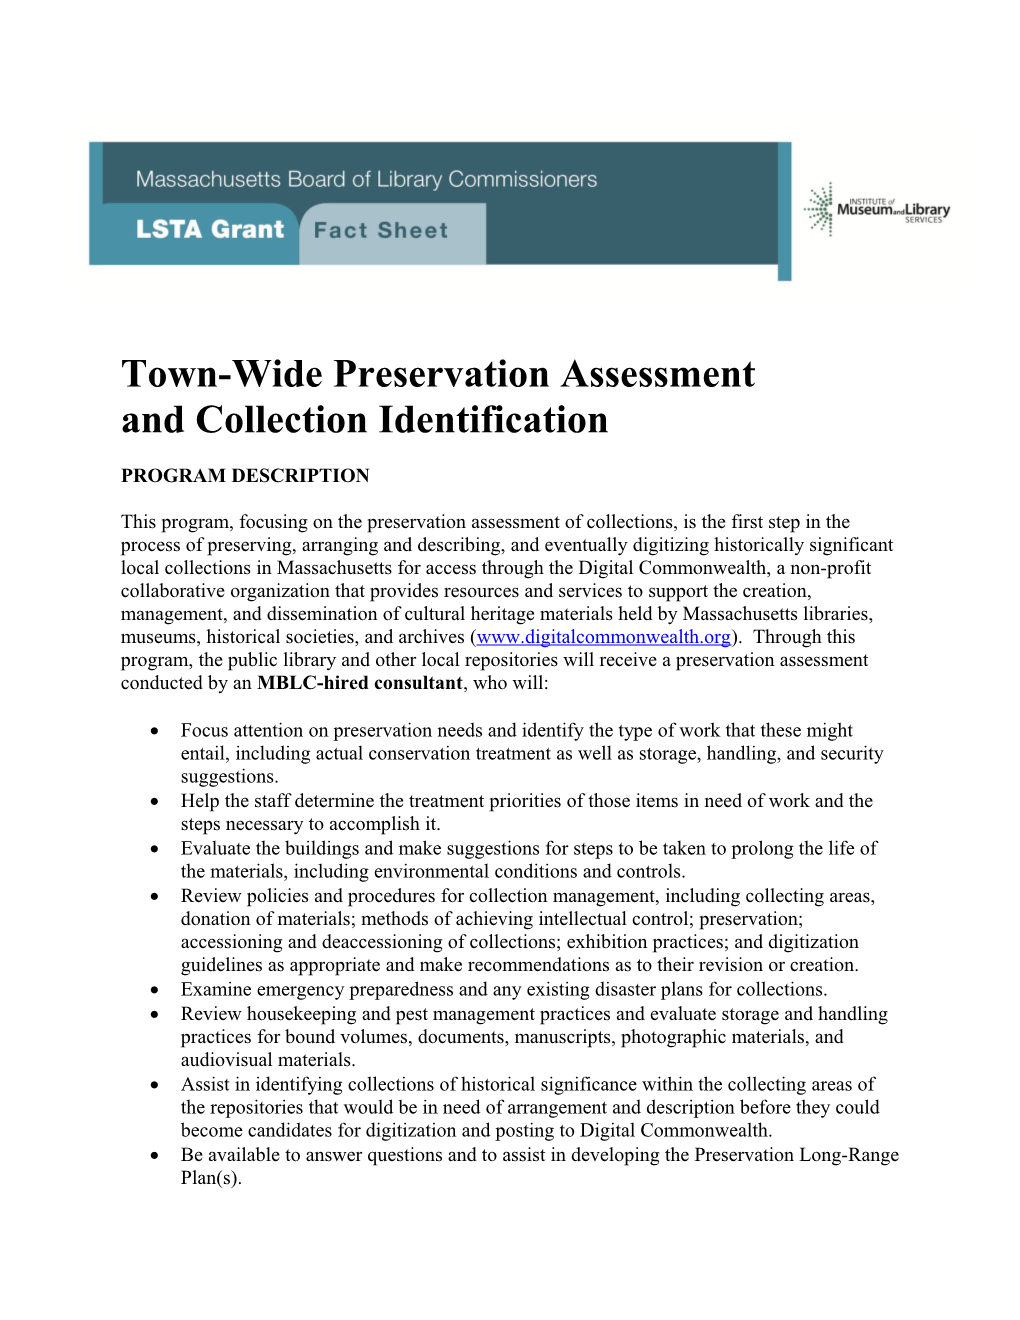 Town-Wide Preservation Assessment and Collection Identification - FY19 LSTA Grant Round